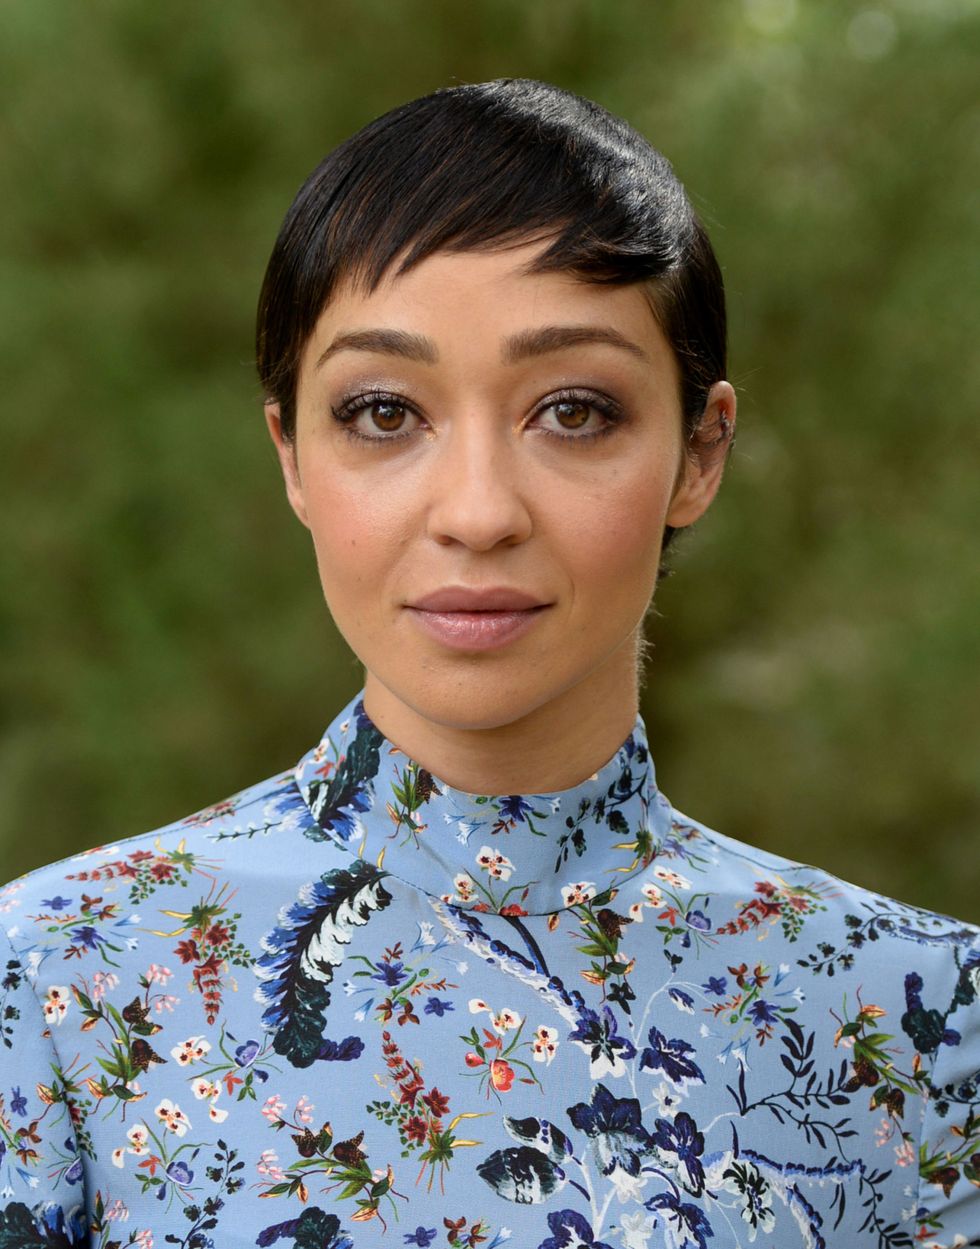 <p>The <a href="http://www.elleuk.com/fashion/celebrity-style/articles/g31411/ruth-negga-style-file/" data-tracking-id="recirc-text-link">Ethiopian/Irish actress</a> has received her first Oscar nod for her leading role in <em data-redactor-tag="em" data-verified="redactor">Loving—</em>a film centered on the relationship of an interracial couple who challenged Virginia's anti-miscegenation laws, taking their case to the US Supreme Court.&nbsp;</p><p>In a statement,&nbsp;Negga said: "I am truly humbled by the news this morning, and I thank the Academy for this recognition, which I share with my co-collaborators Jeff Nichols and Joel Edgerton."</p>